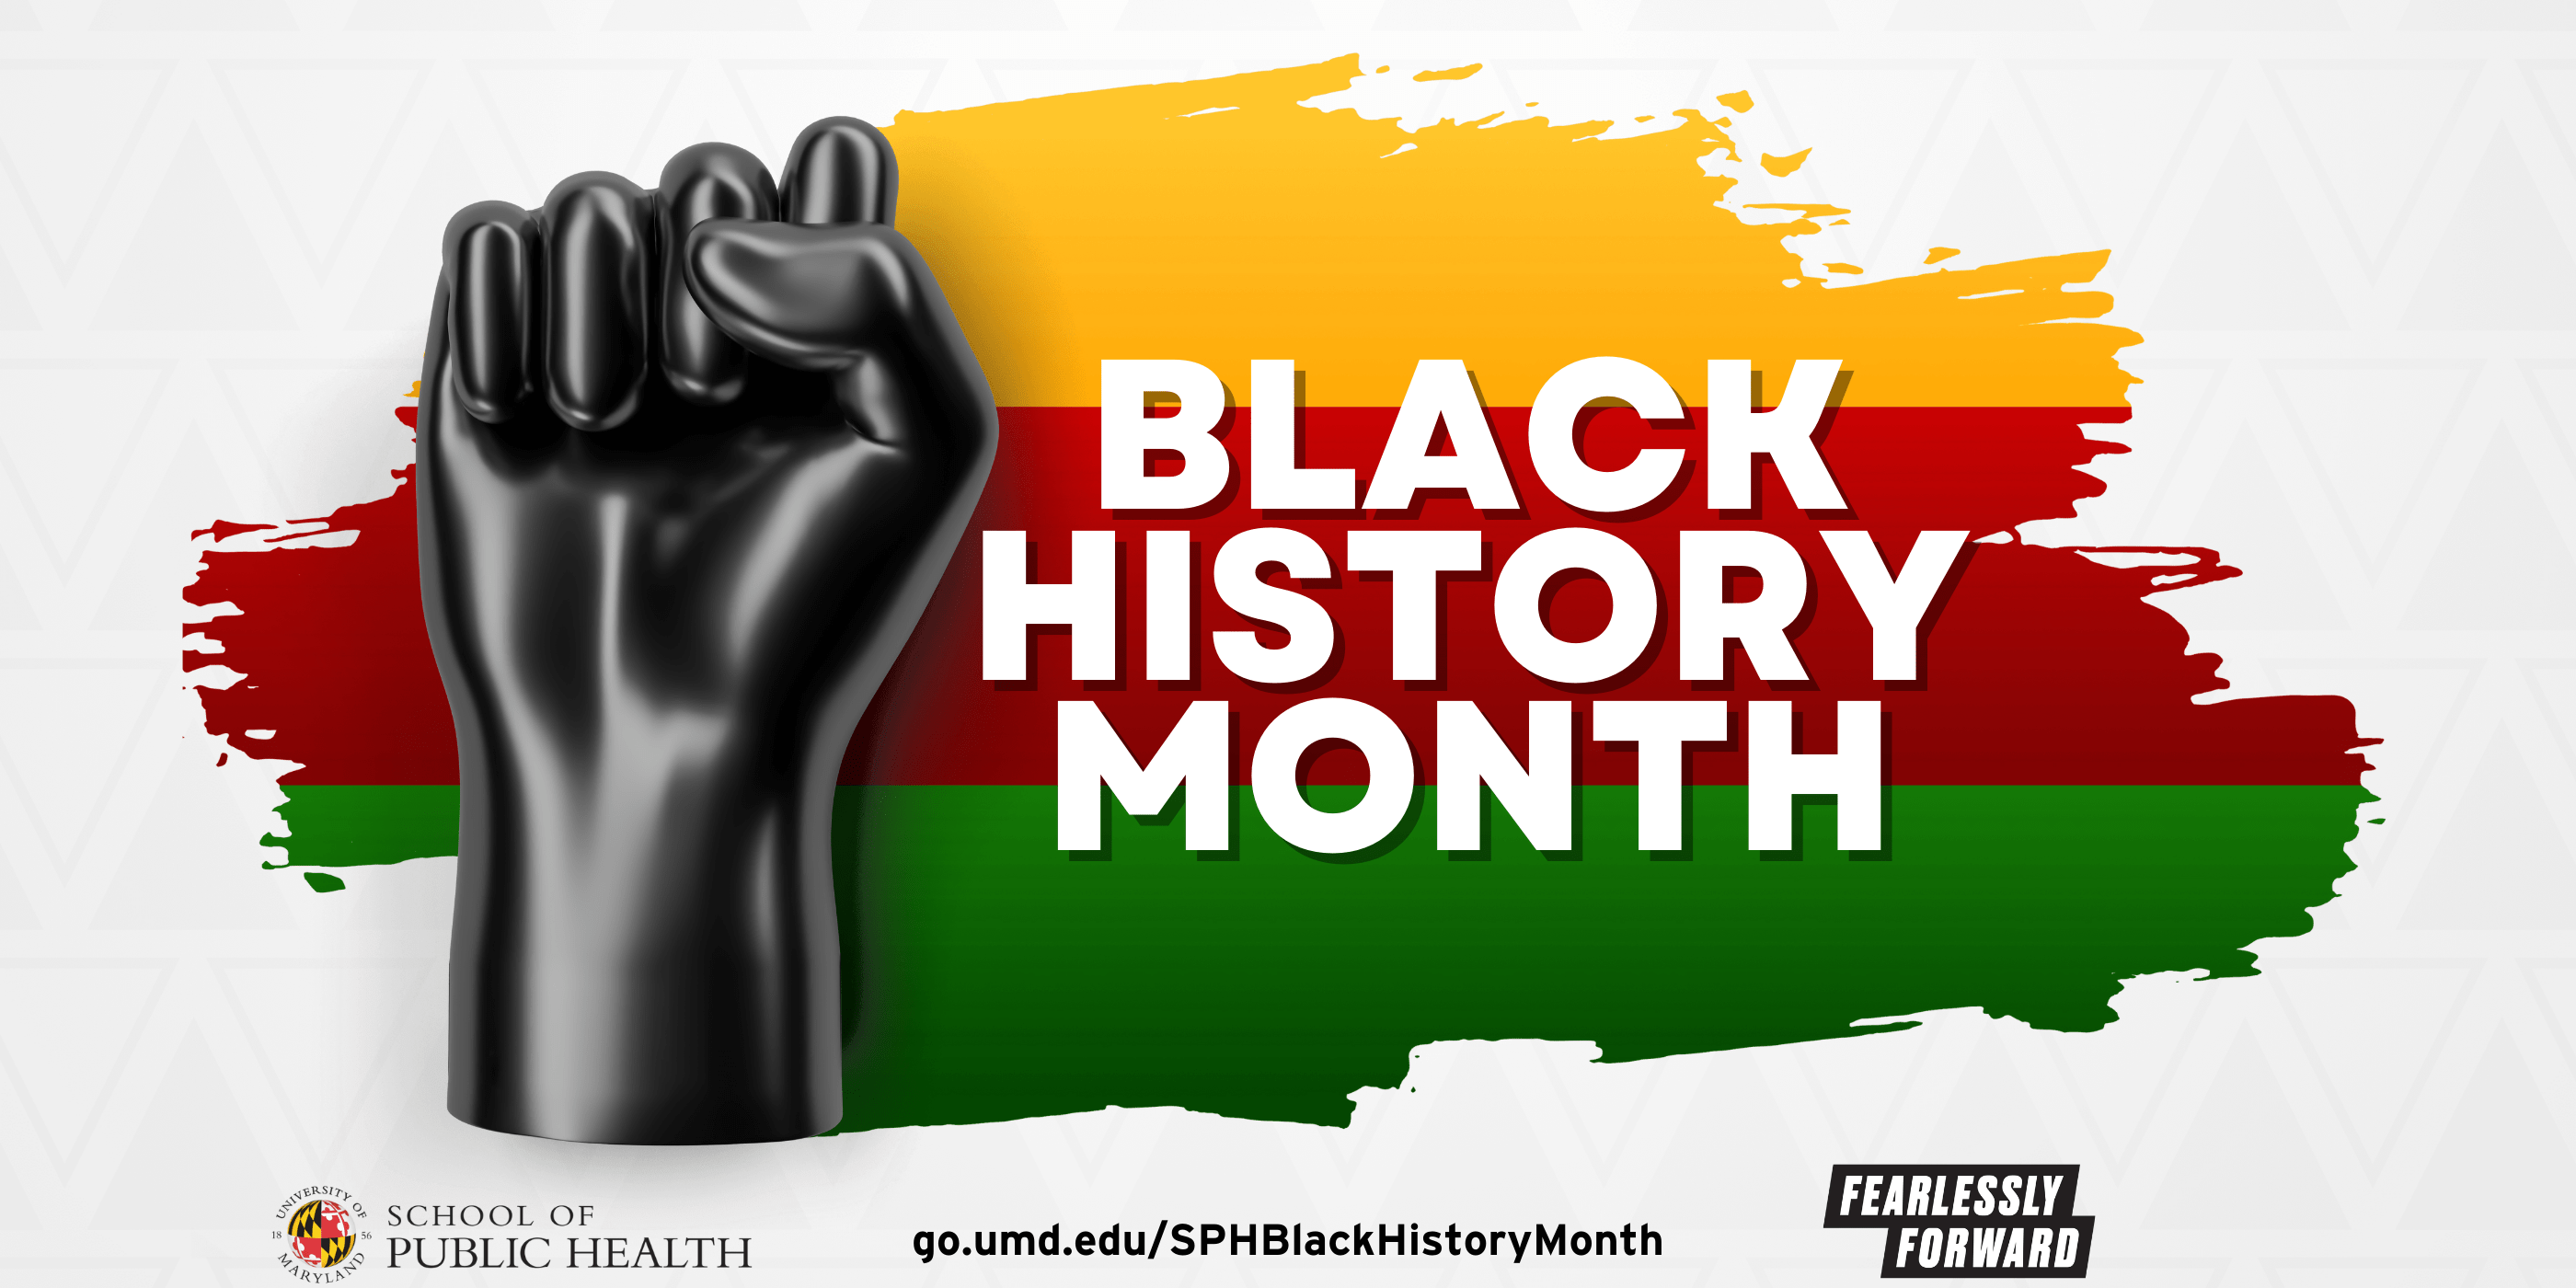 An all black raised fist on the left, the words "Black History Month" in the middle, all with African toned colors of yellow, black and green in the background